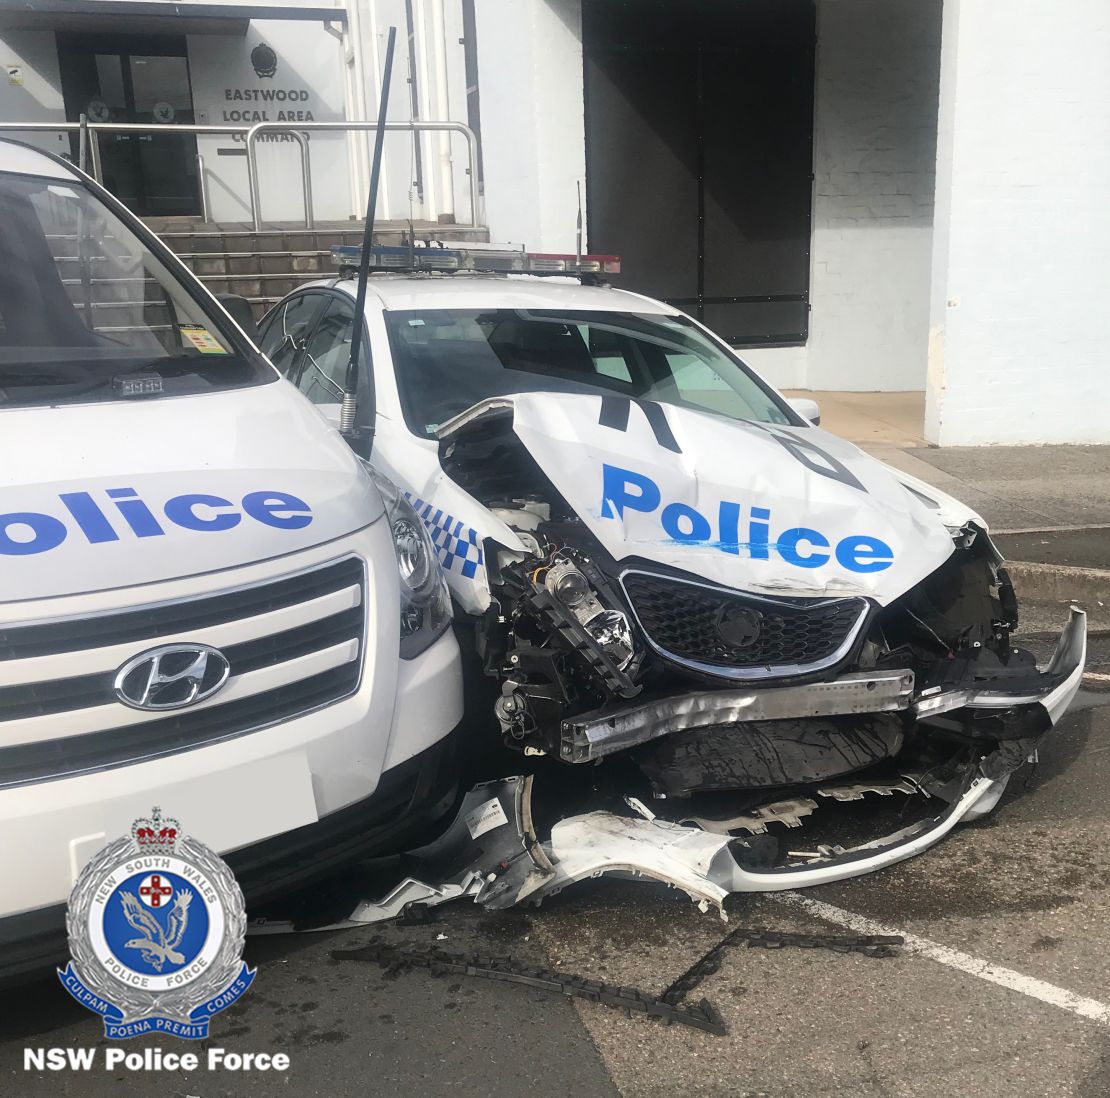 A police car damaged after it was allegedly hit by a van carrying a large meth haul in Sydney, Australia, on July 23, 2019. 